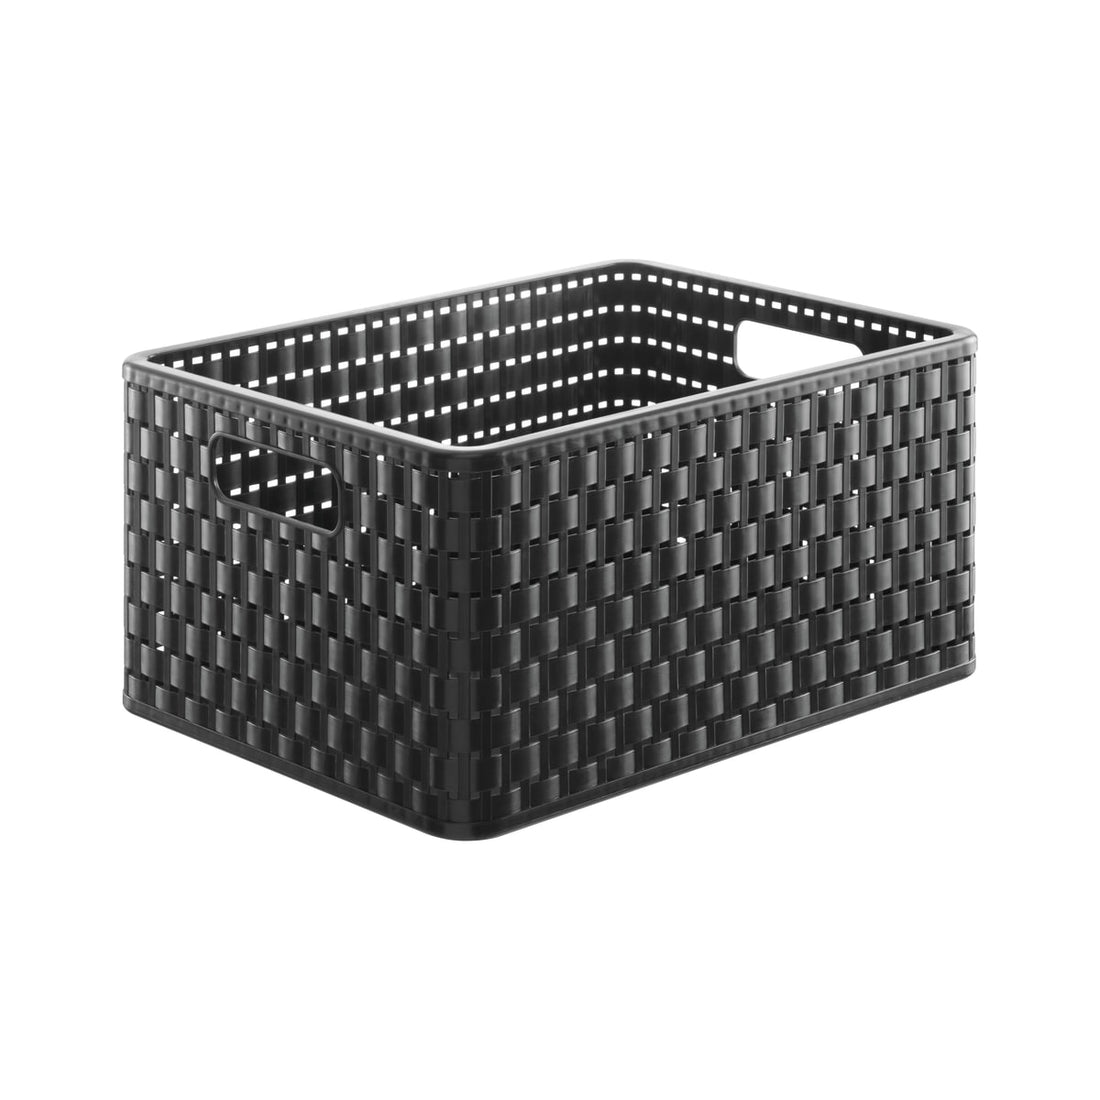 COUNTRY BASKET A4 36.8X27.8X19.1 CM ANTHRACITE